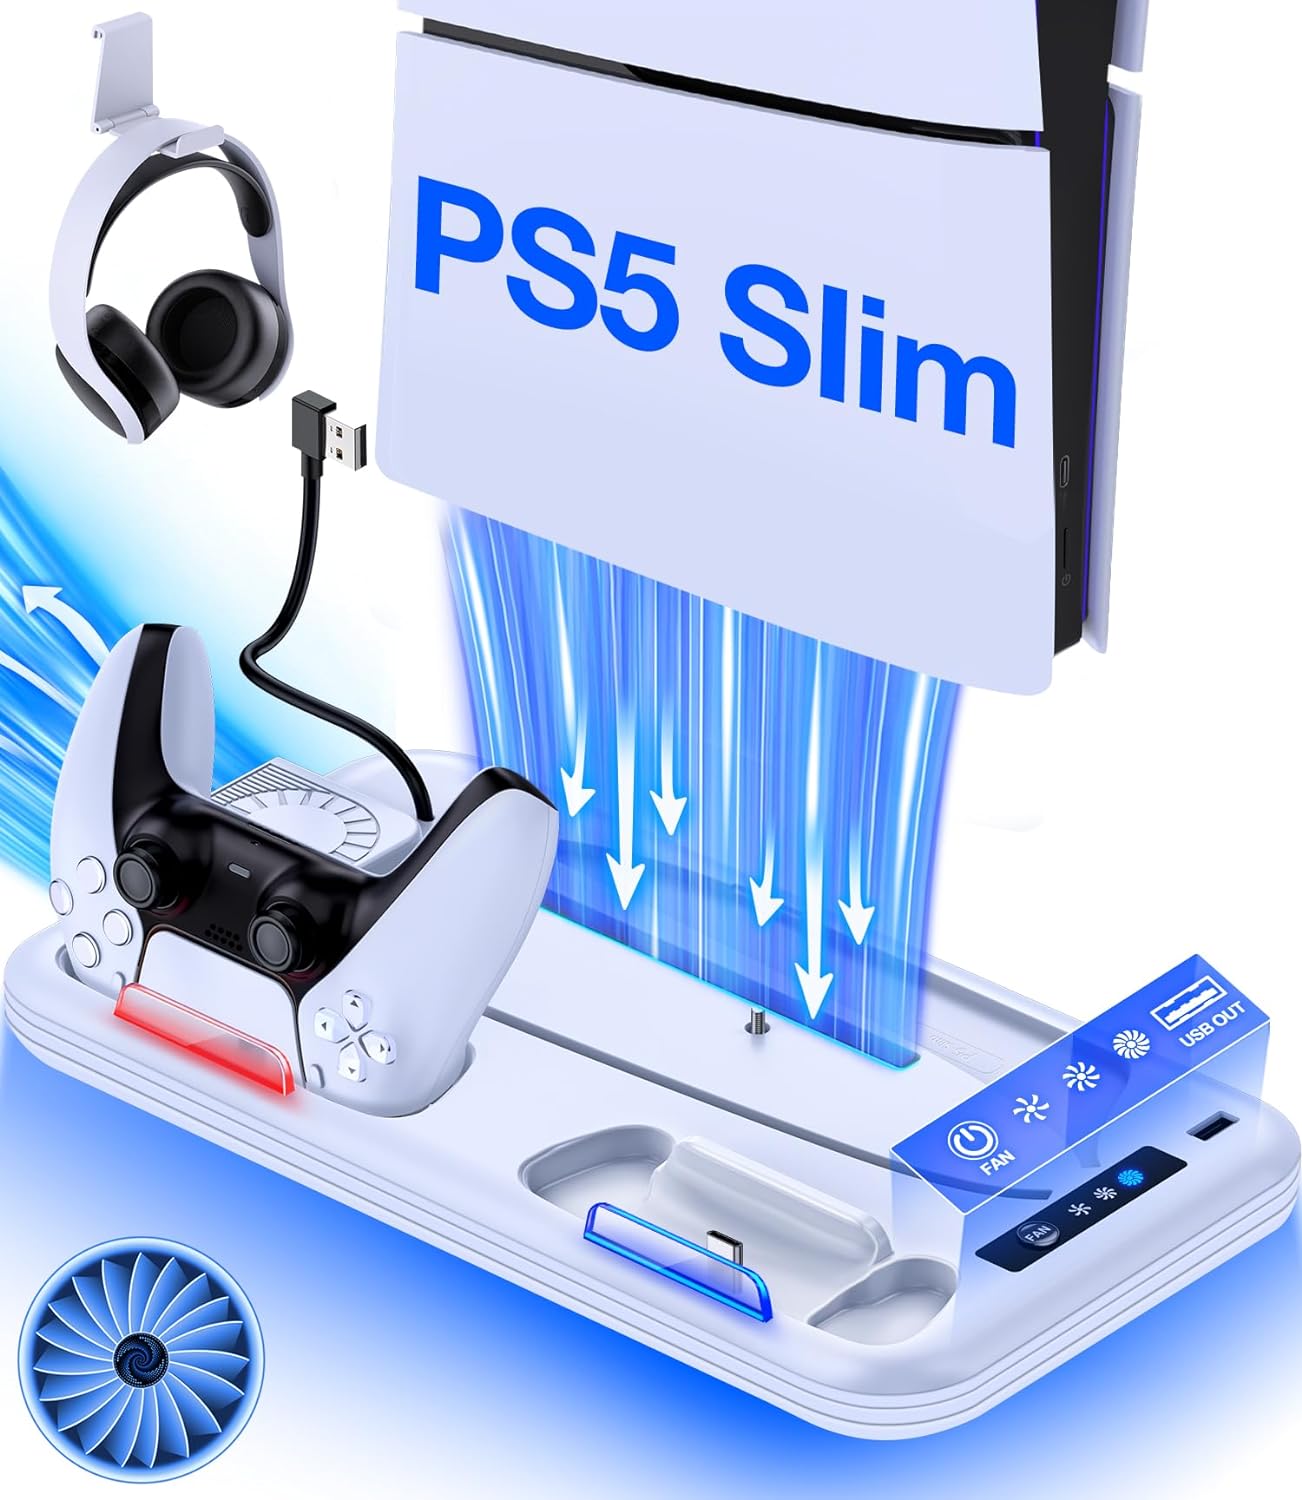 PS5 Slim Stand Cooling Station Compatible with PS5 Slim Console,PS5 Slim Accessories Vertical Cooling Stand Cooler Incl. Dual PS5 Controller Charger, 3 Levels Cooling Fan,RGB Light,Headset Holder